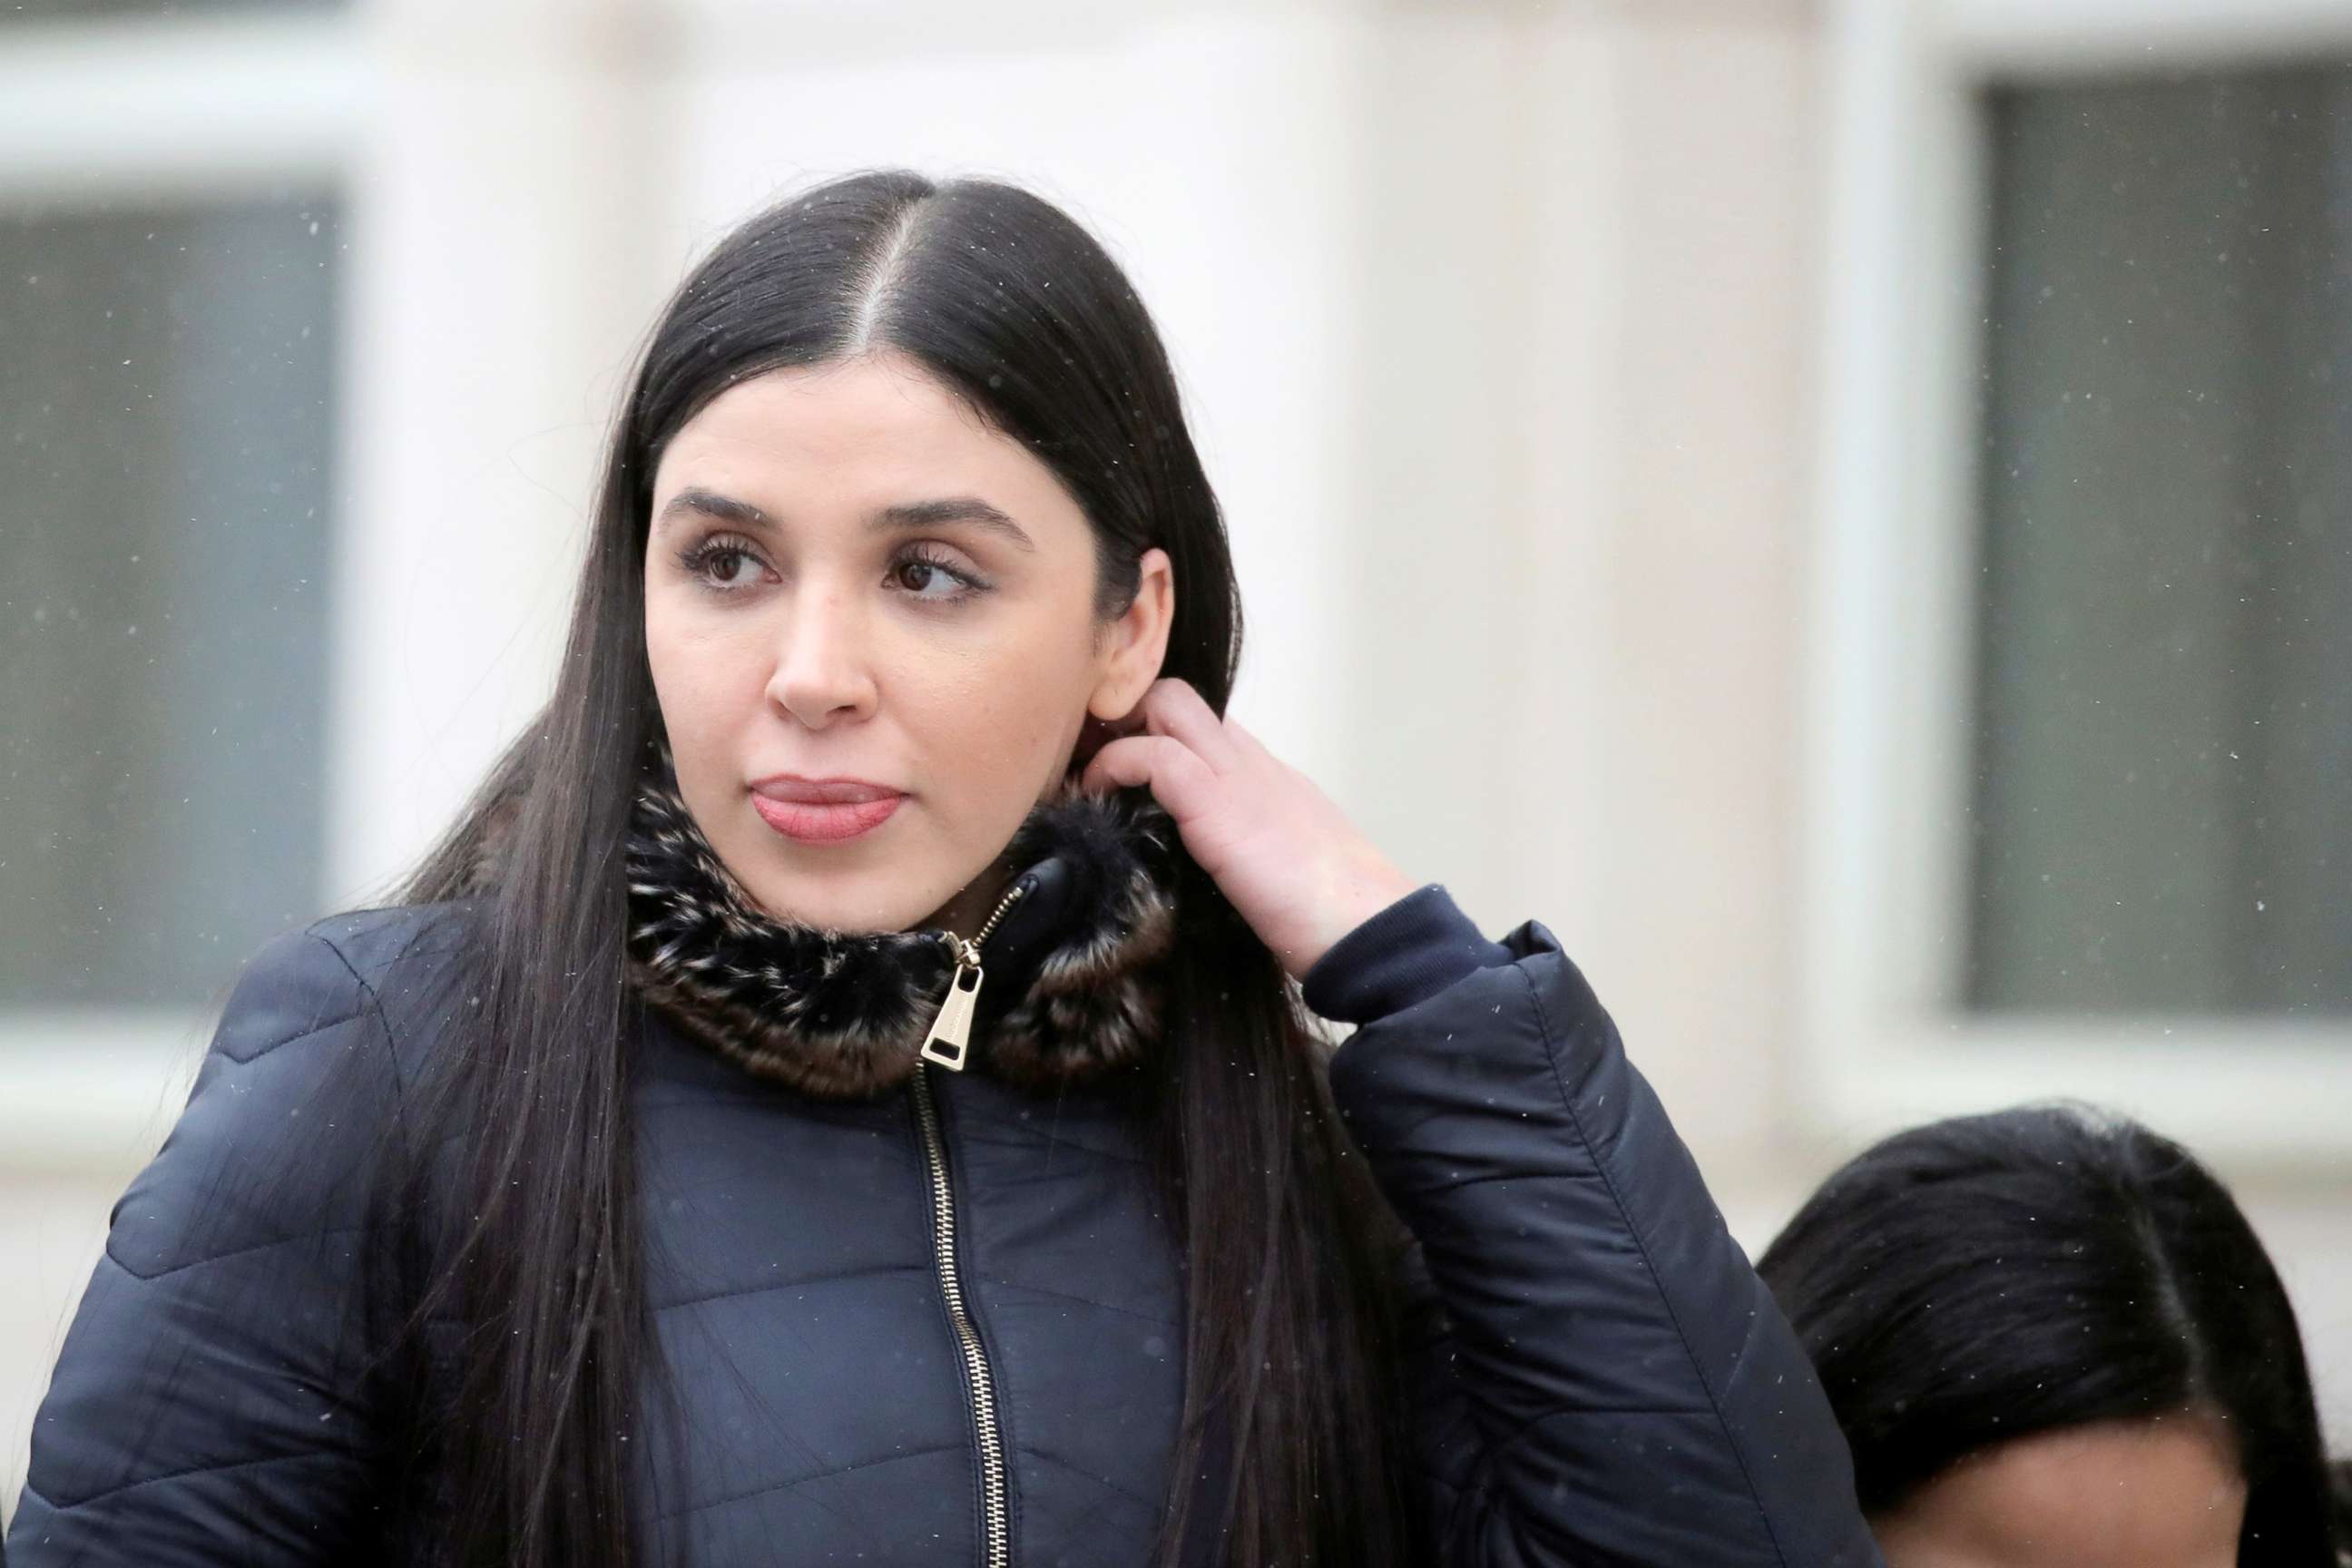 Emma Coronel Aispuro, Wife of “El Chapo” Guzman, to be Released from Halfway House